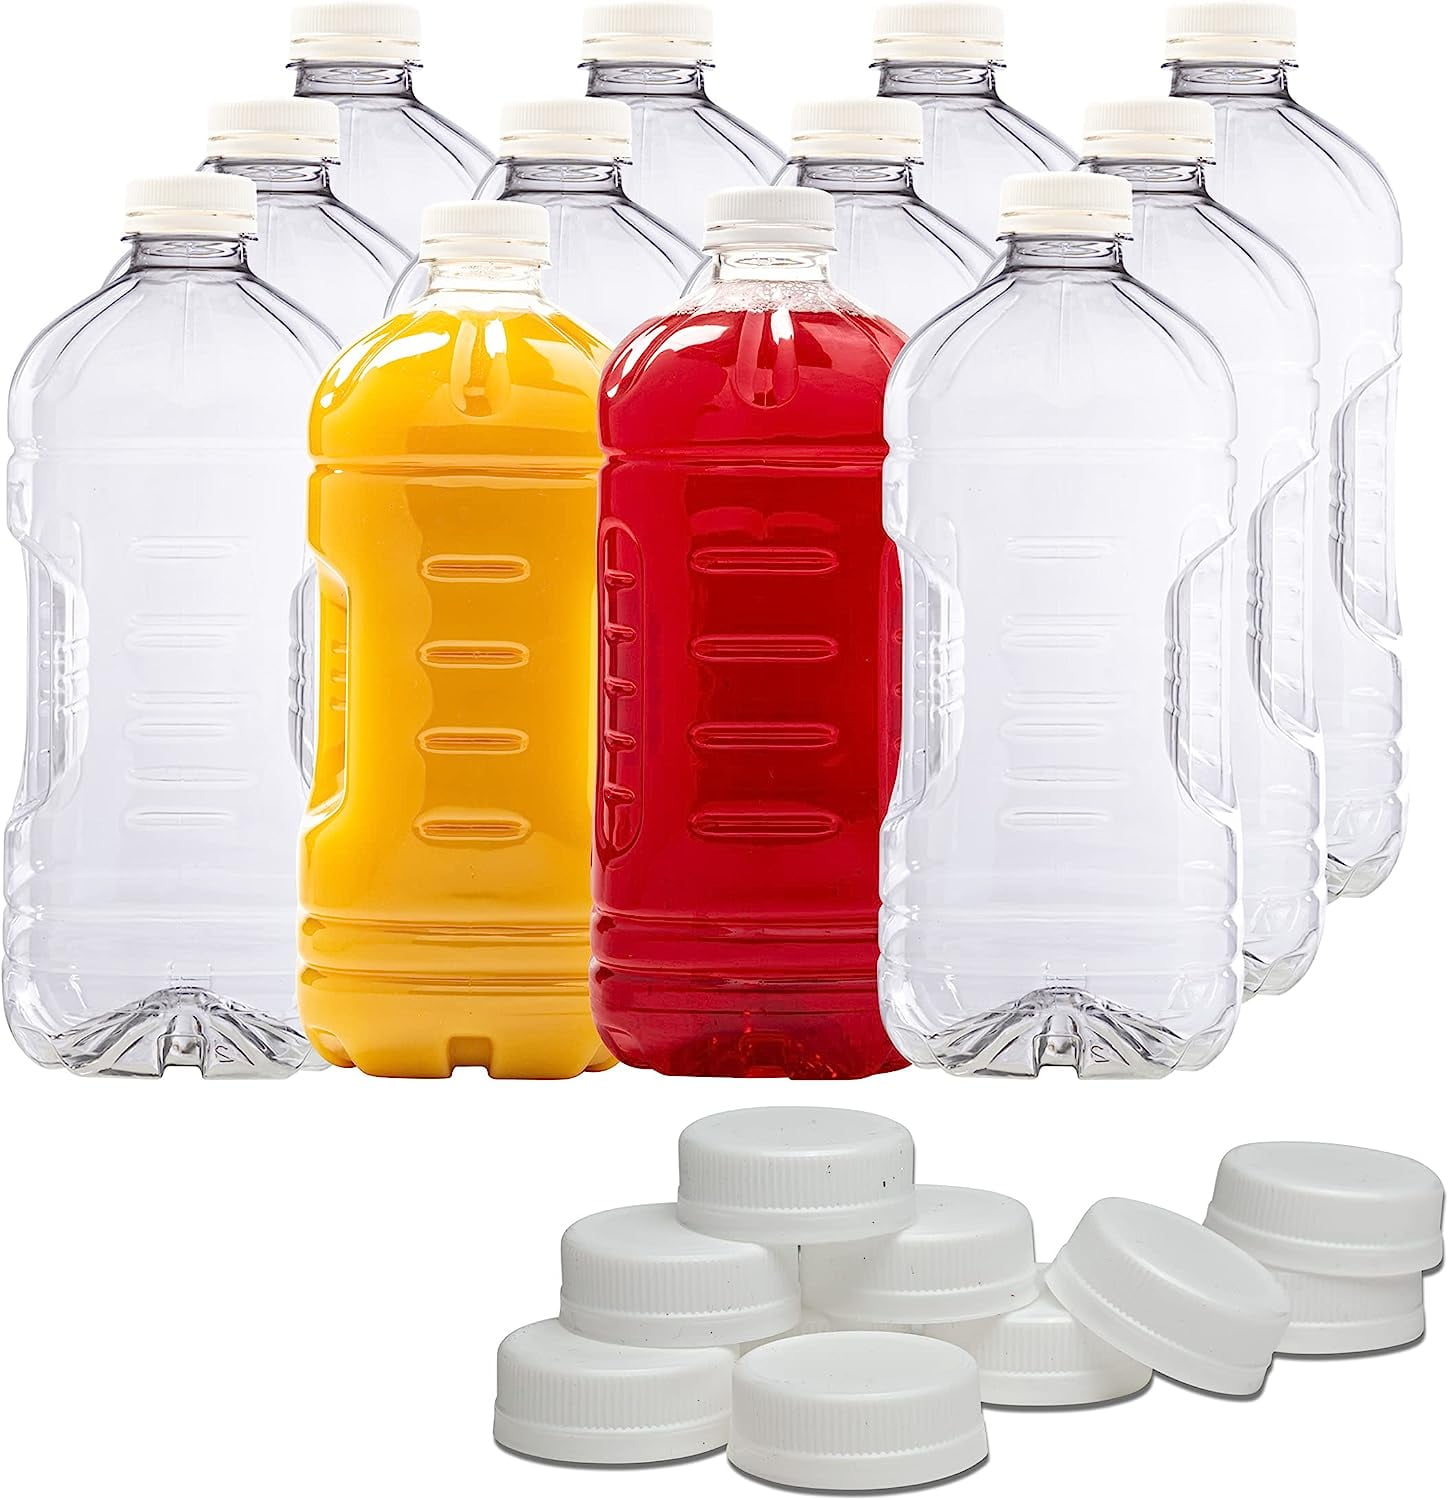  100 Pcs 2oz Small Clear Plastic Juice Bottles with Lid